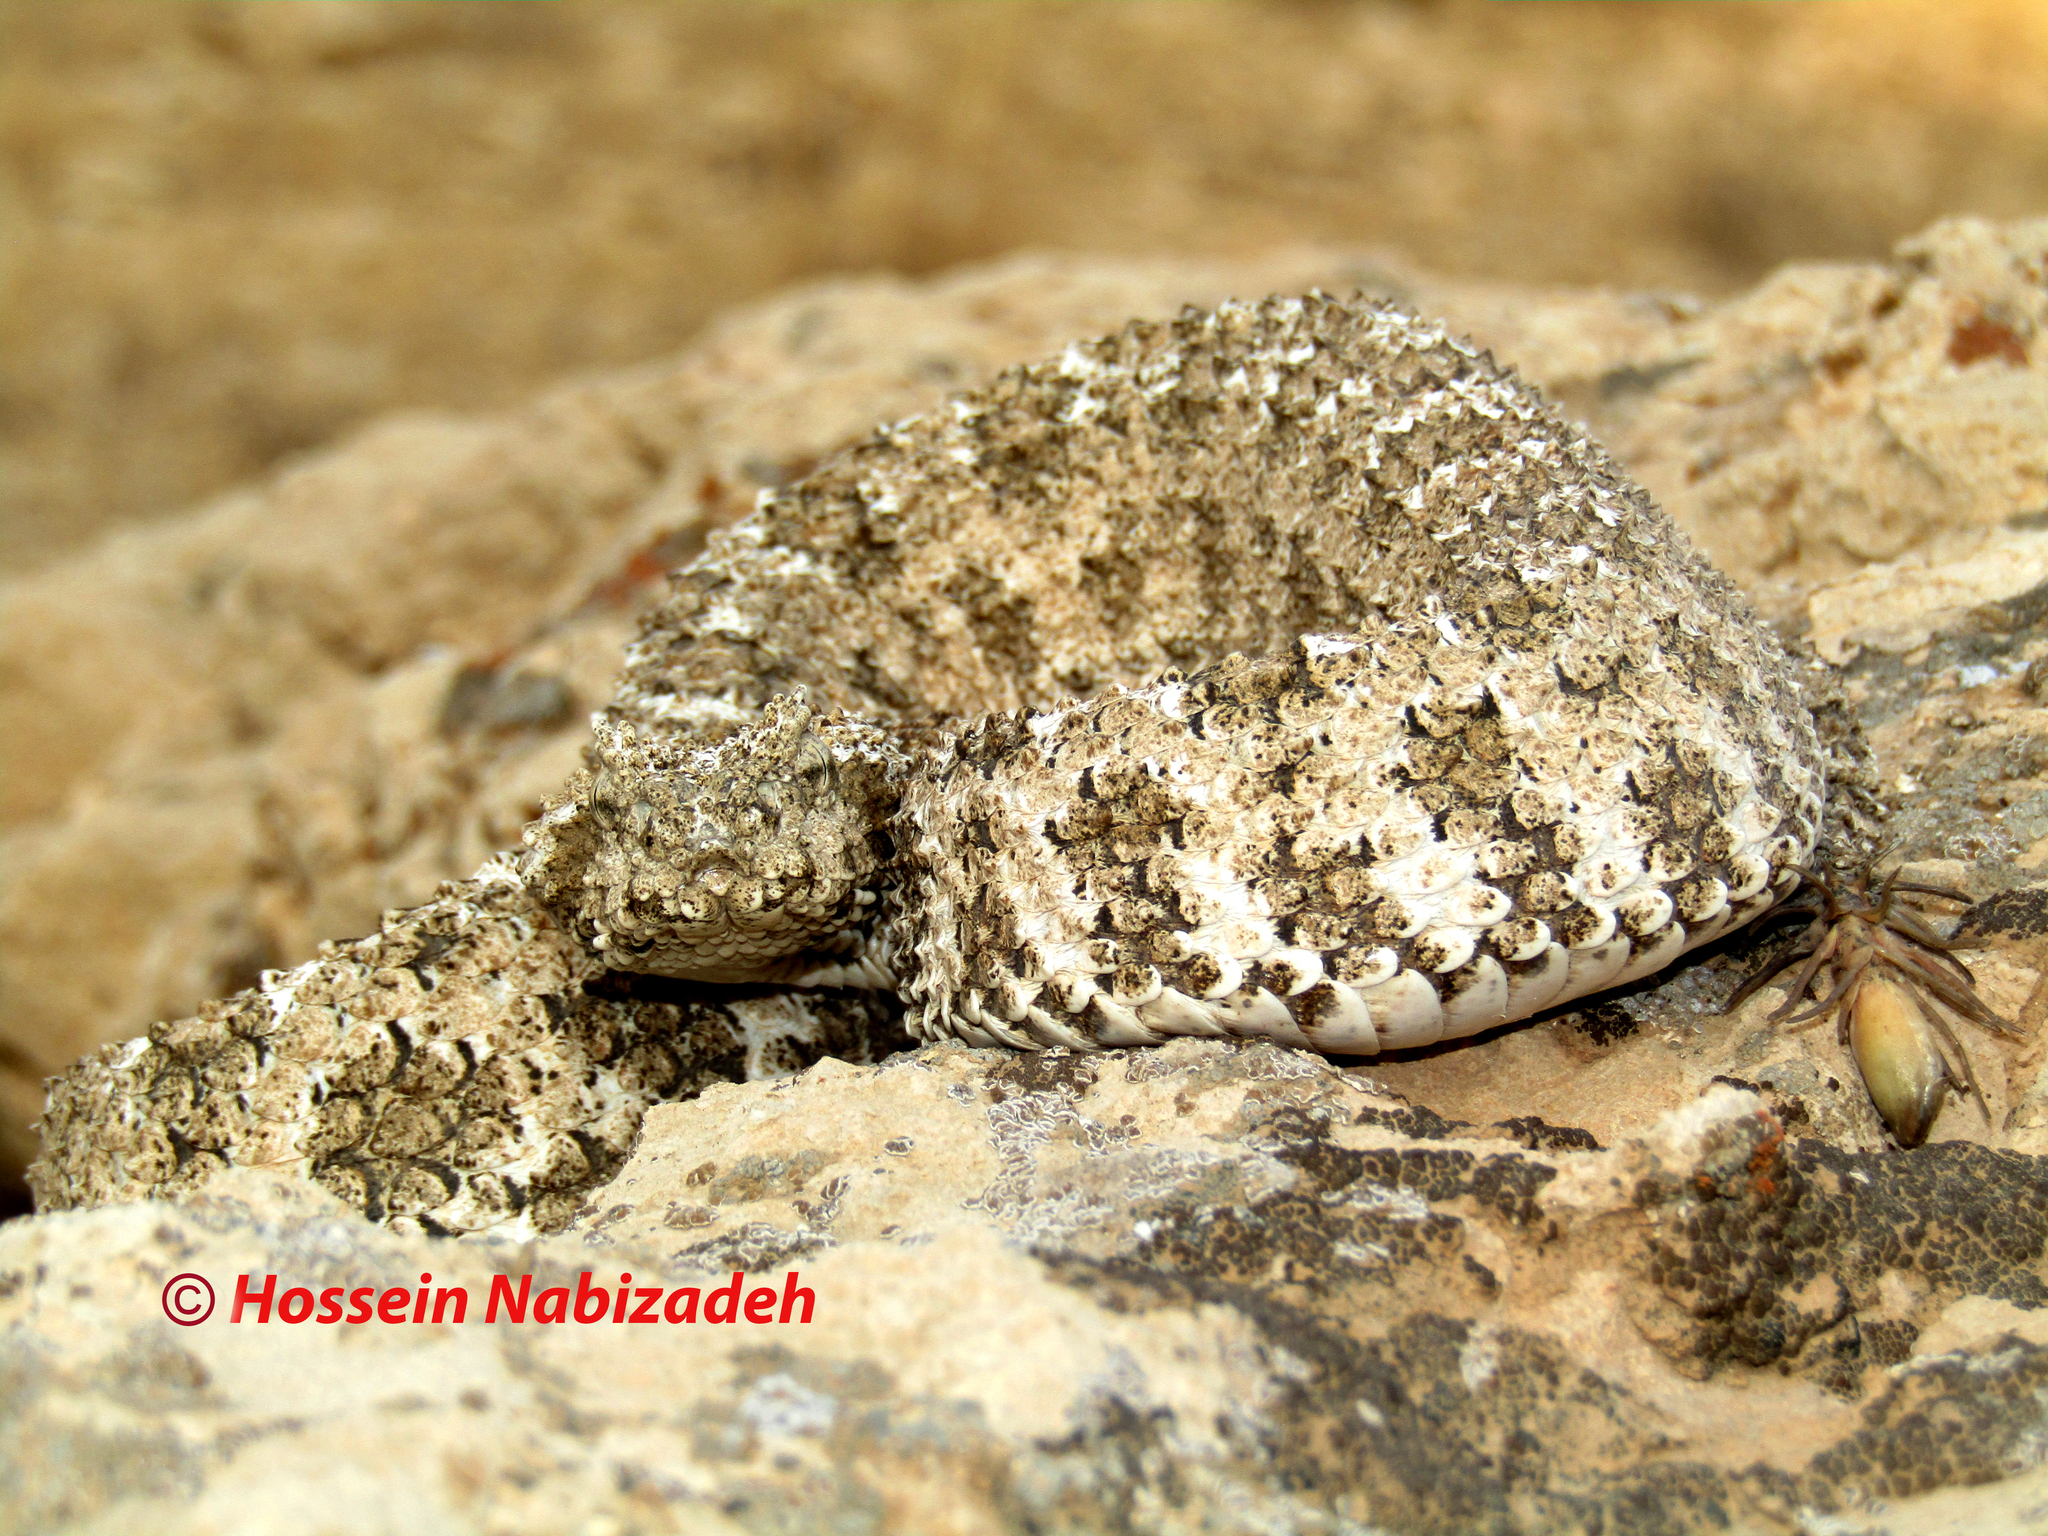 Spider-Tailed Horned Viper Animal Facts  Pseudocerastes urarachnoides -  A-Z Animals